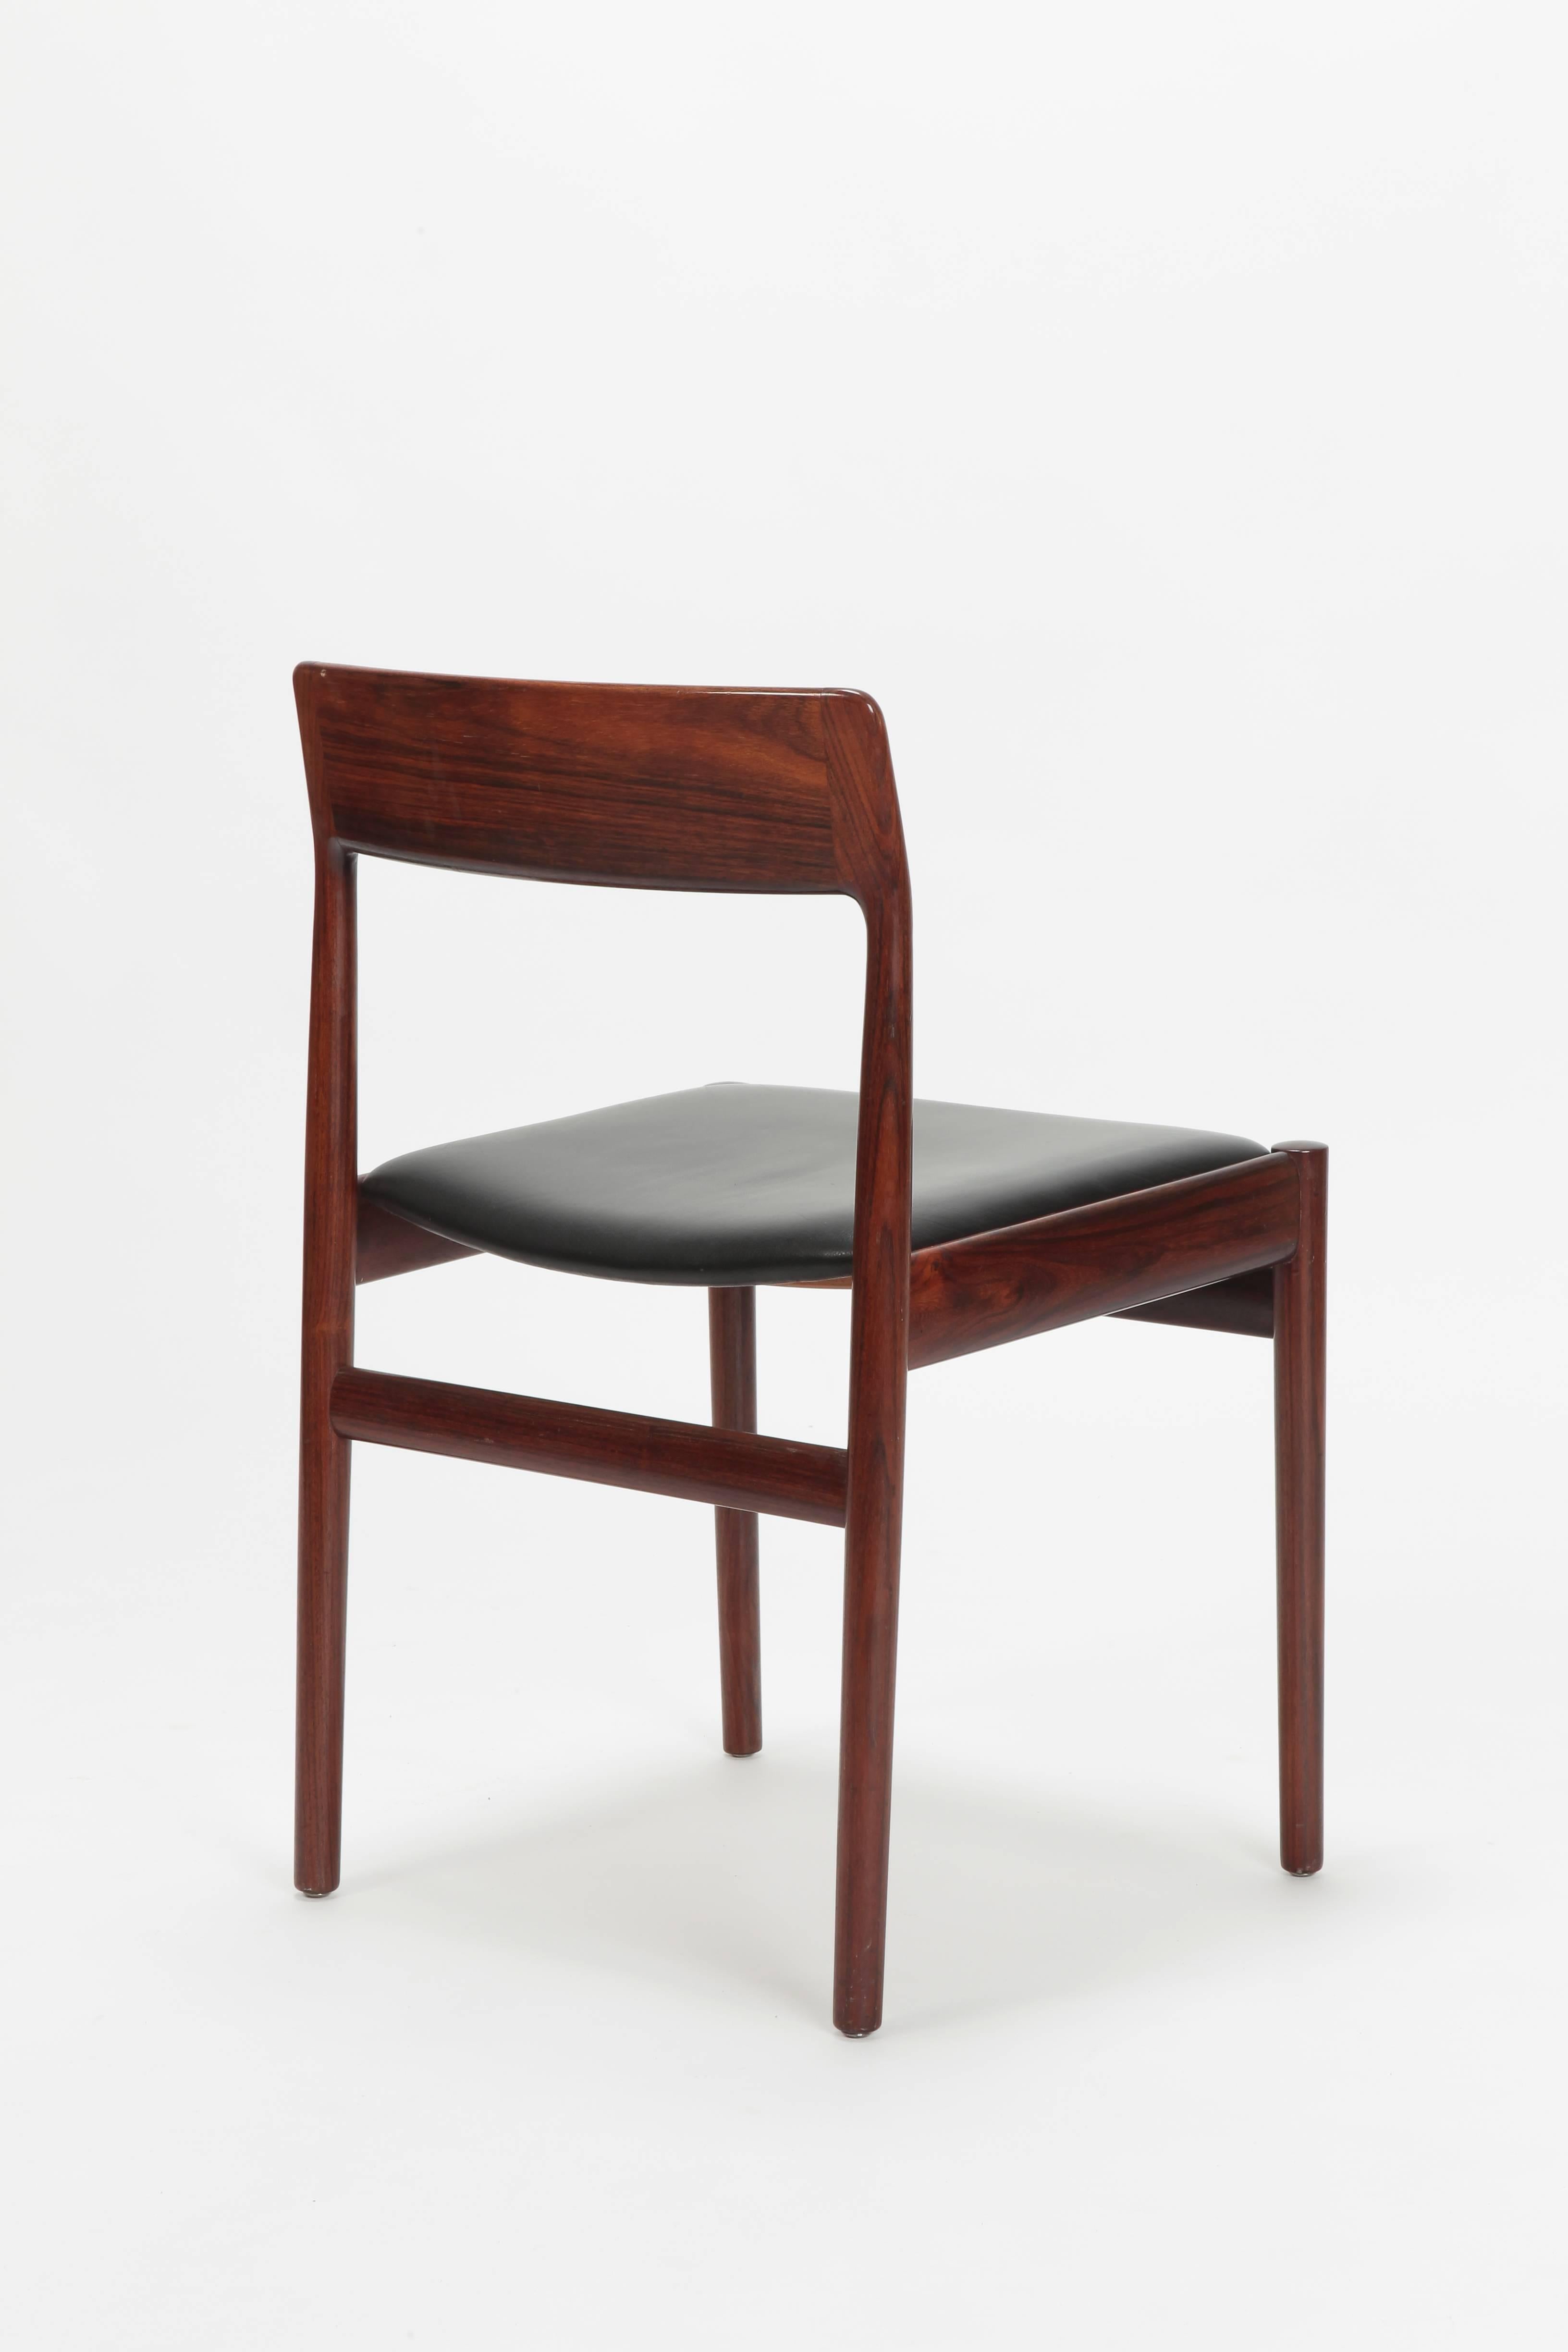 5 Johannes Norgaard Rosewood Chairs, 1960s 2